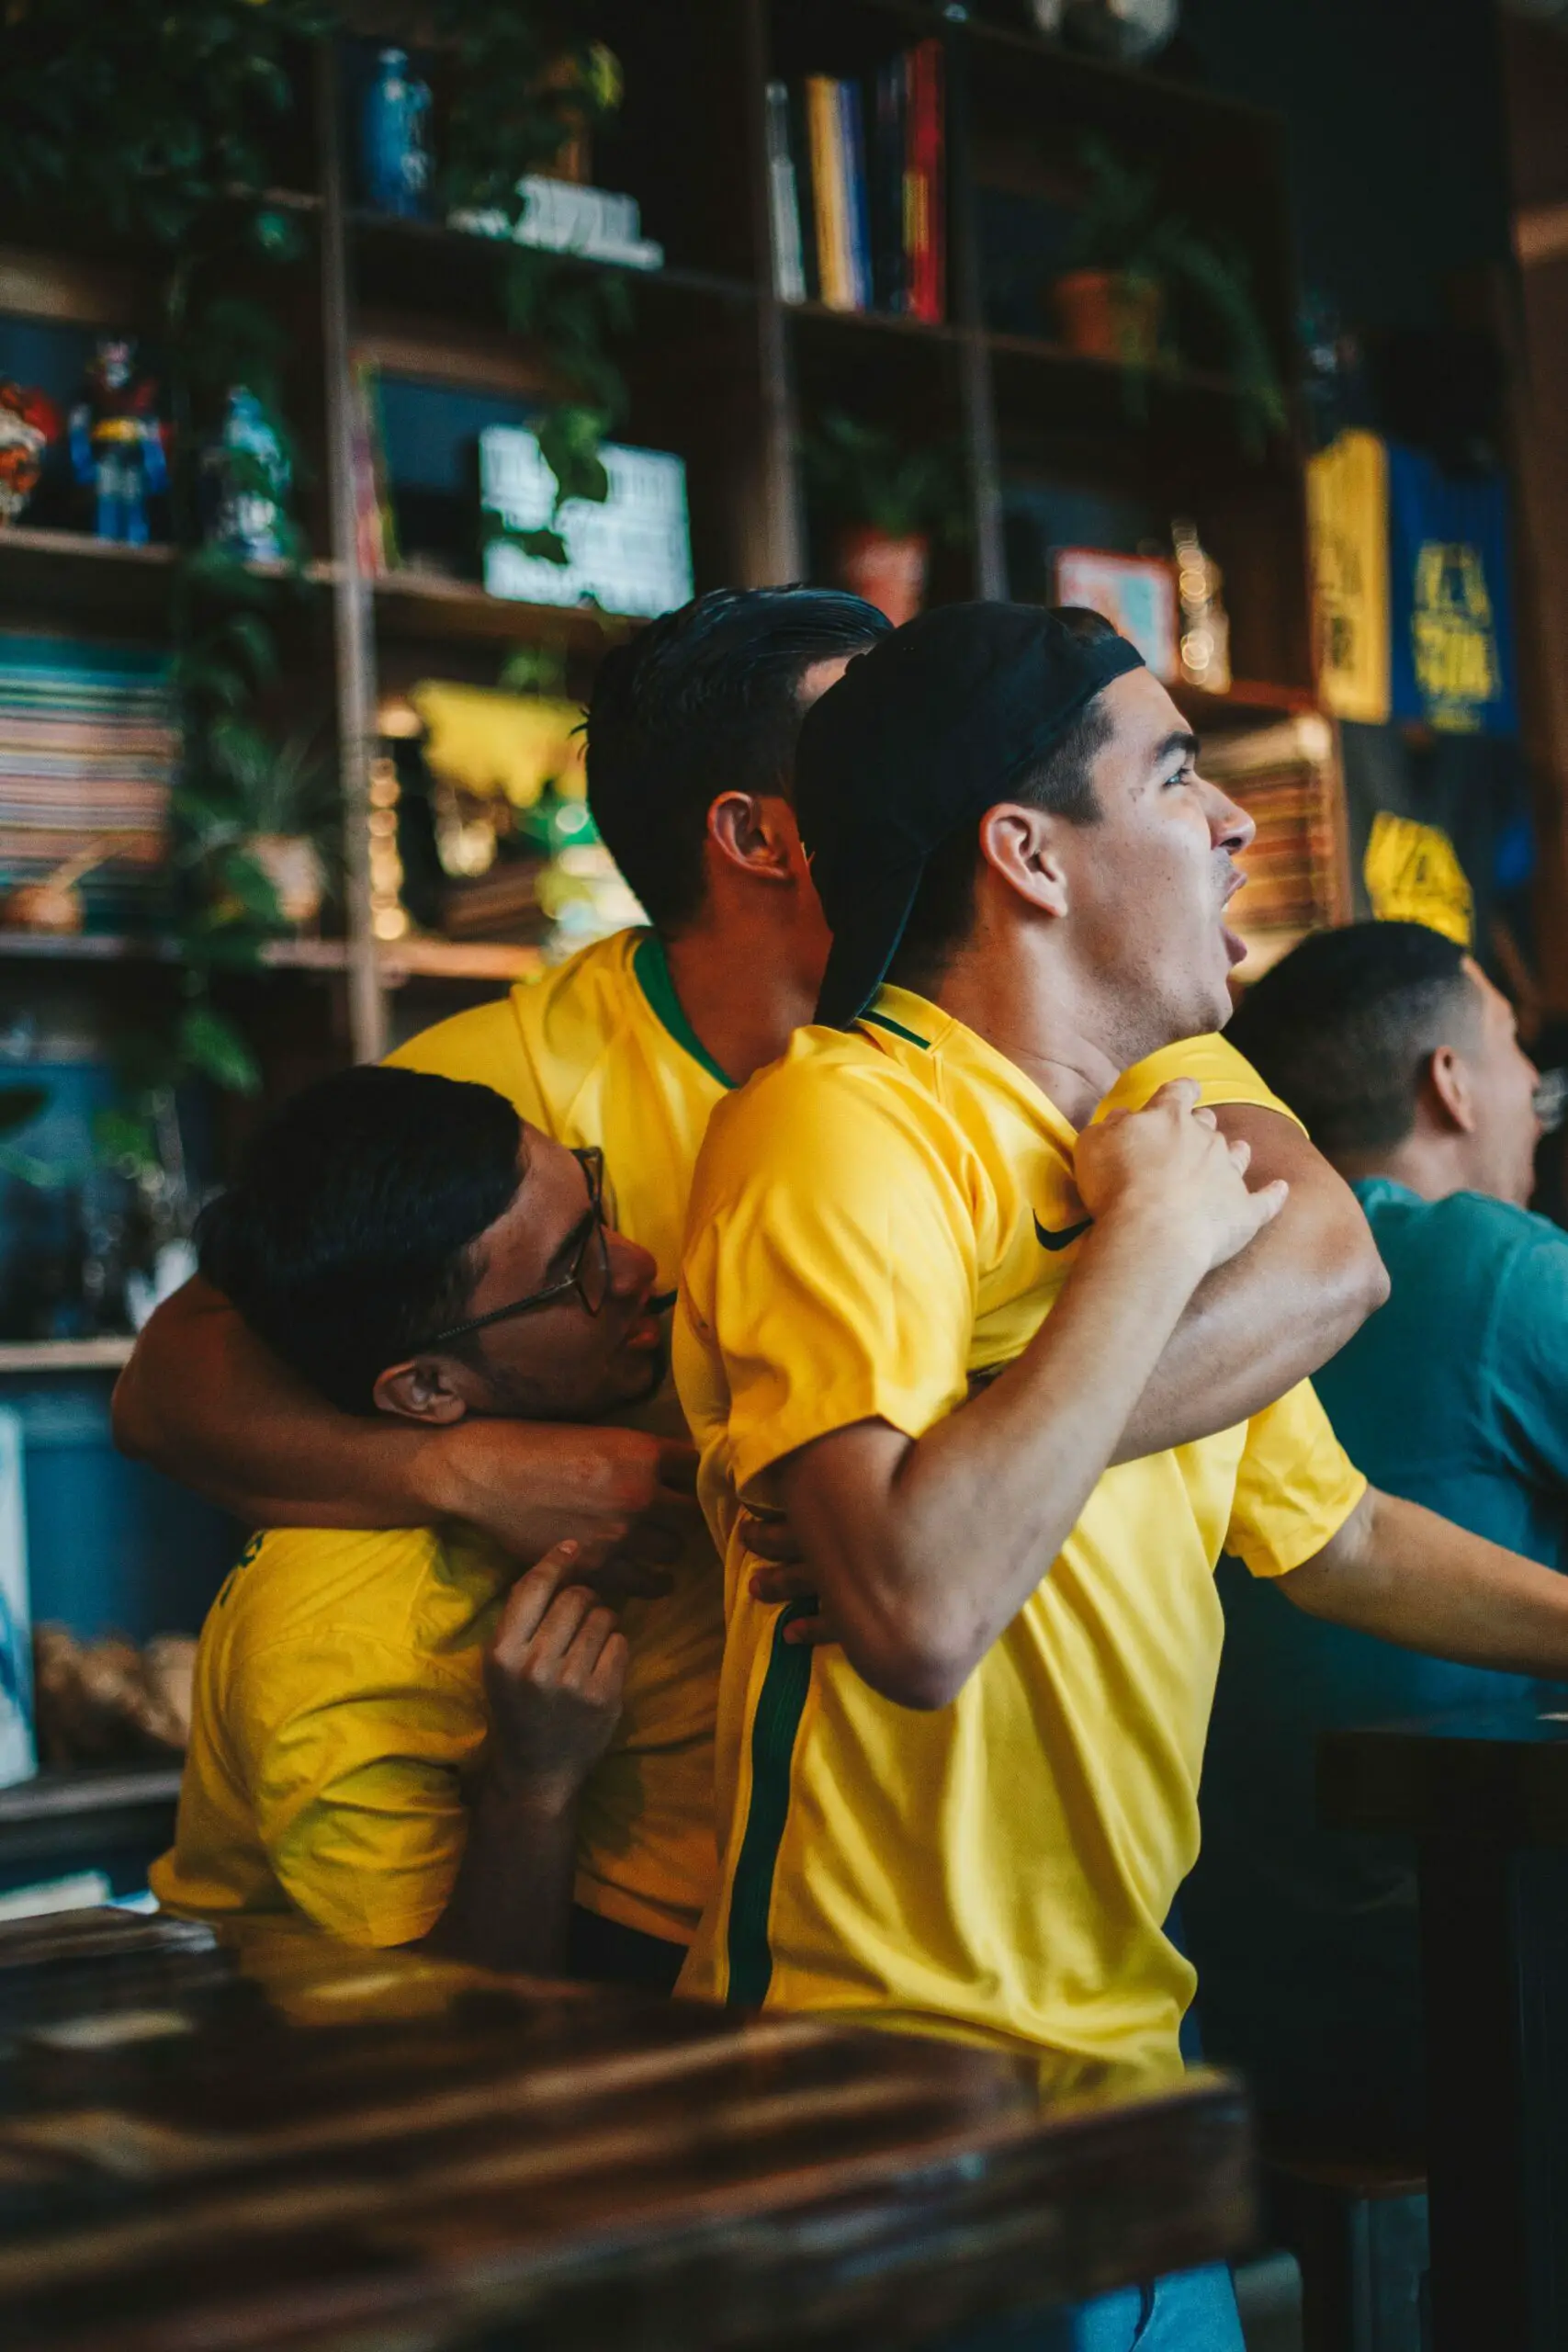 Photo by ELEVATE: https://www.pexels.com/photo/three-men-wearing-yellow-shirt-embracing-each-other-1267295/